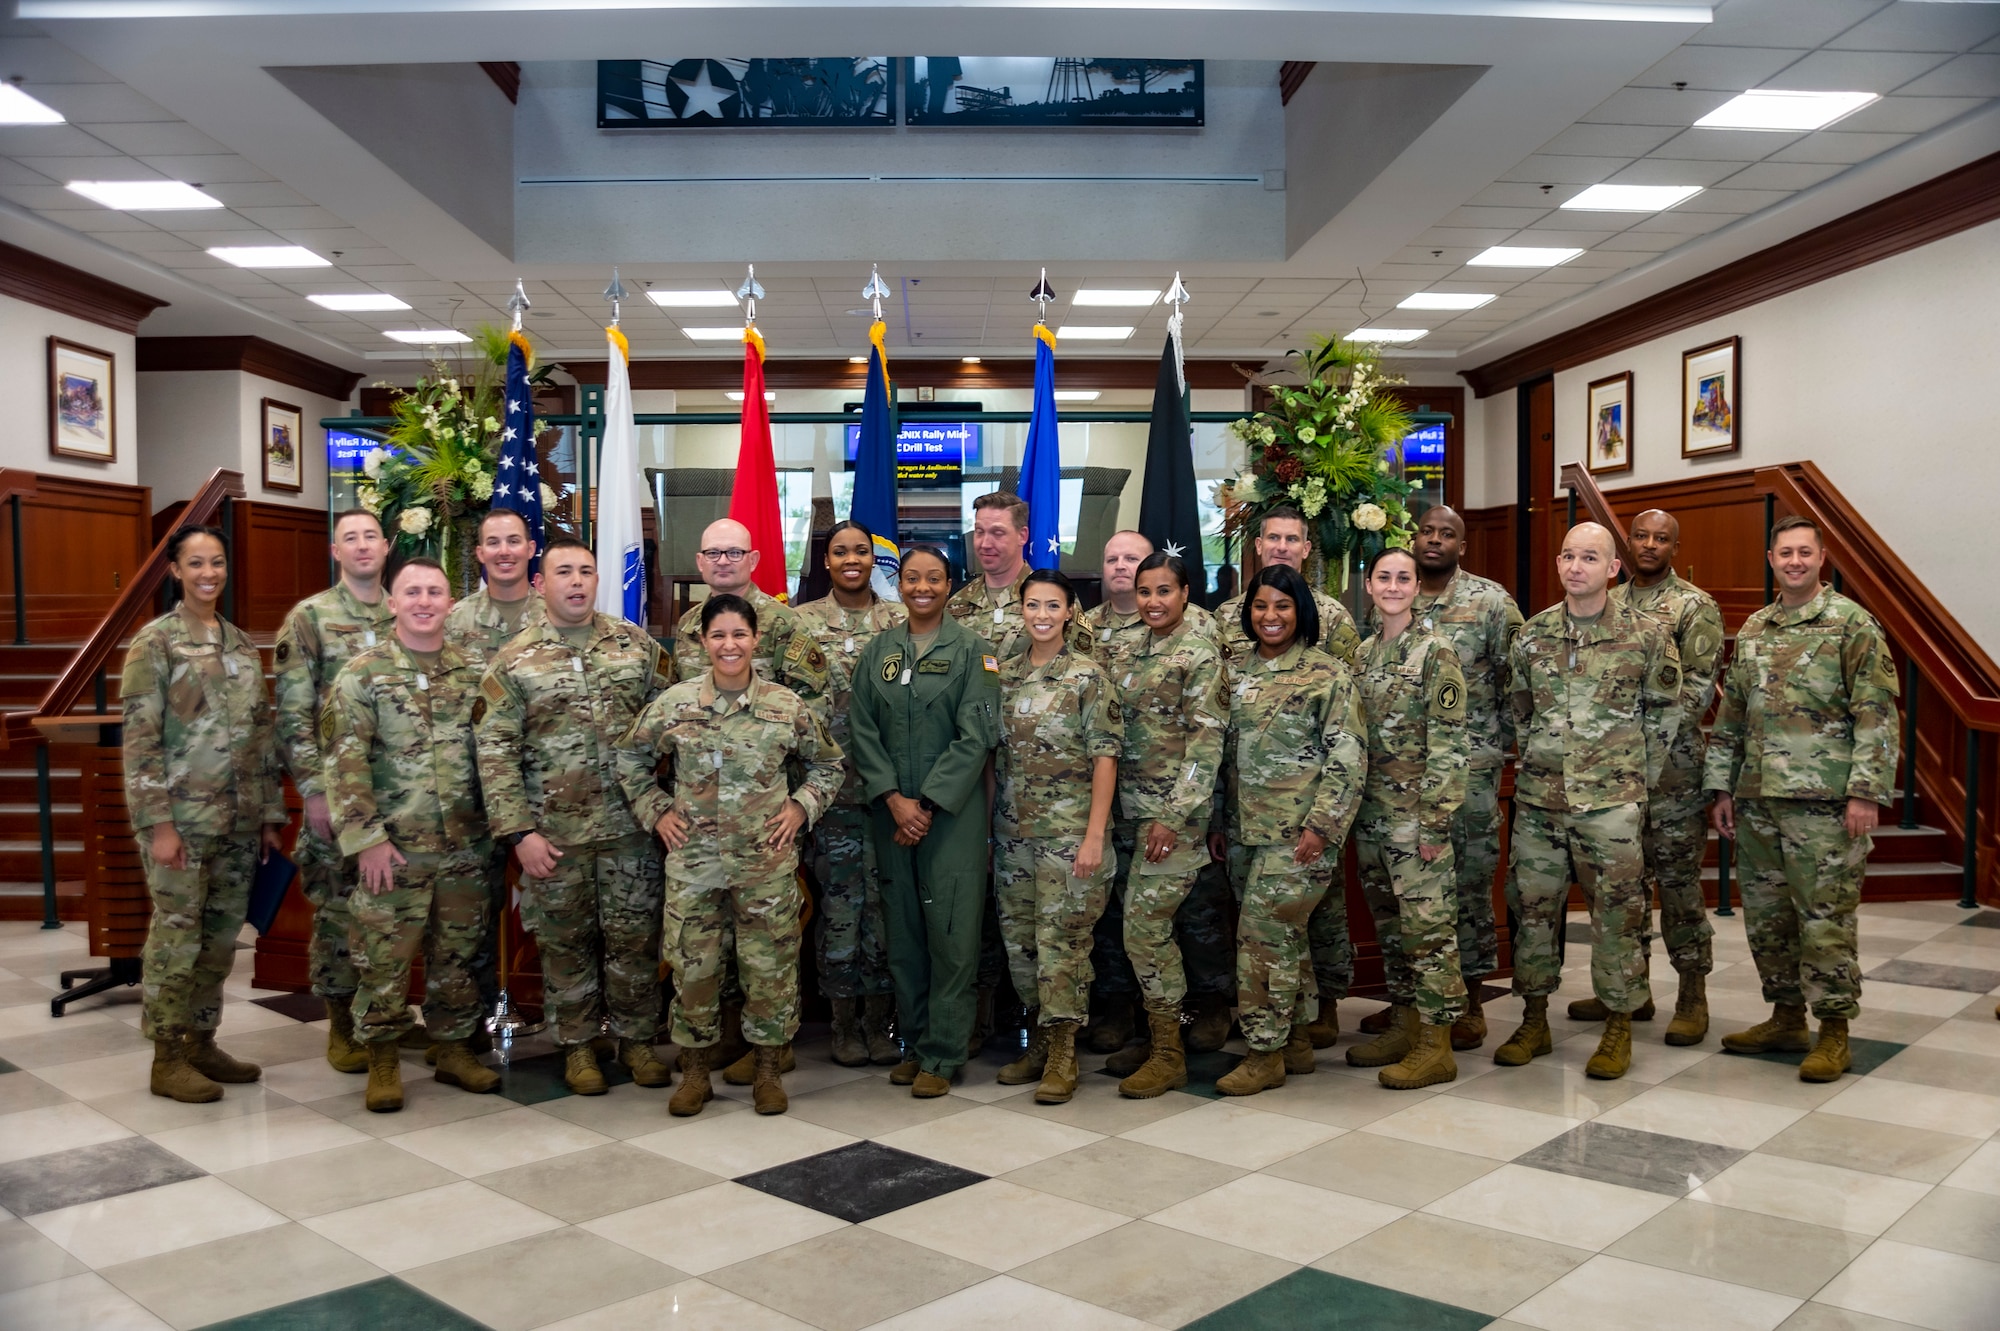 MacDill AFB hosts SMSgt selection ceremony > MacDill Air Force Base > News